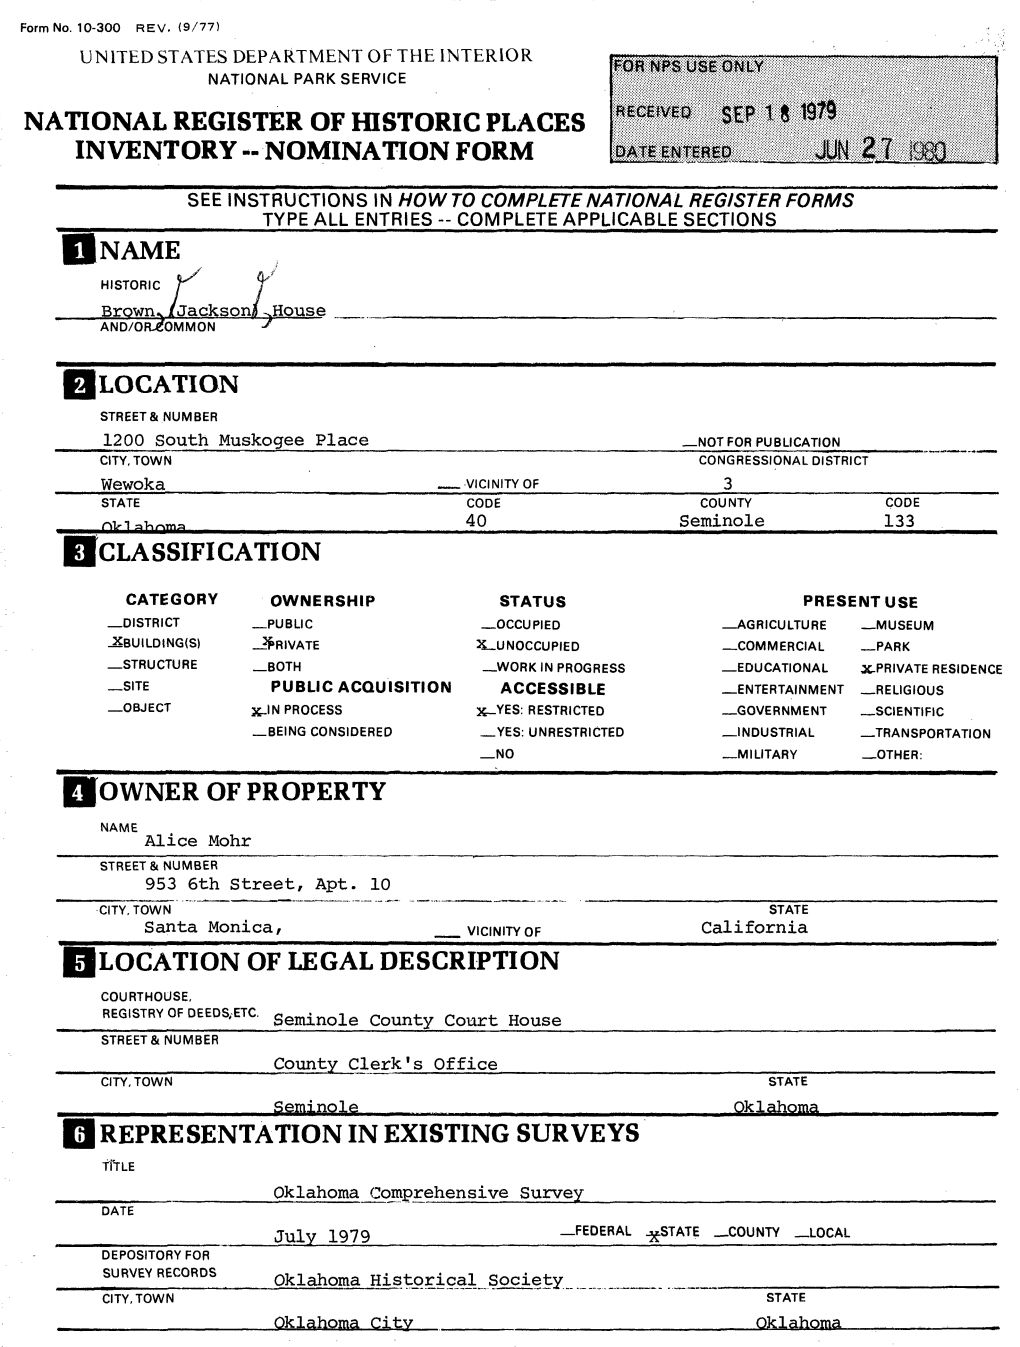 Register of Historic Places Inventory -Nomination Form